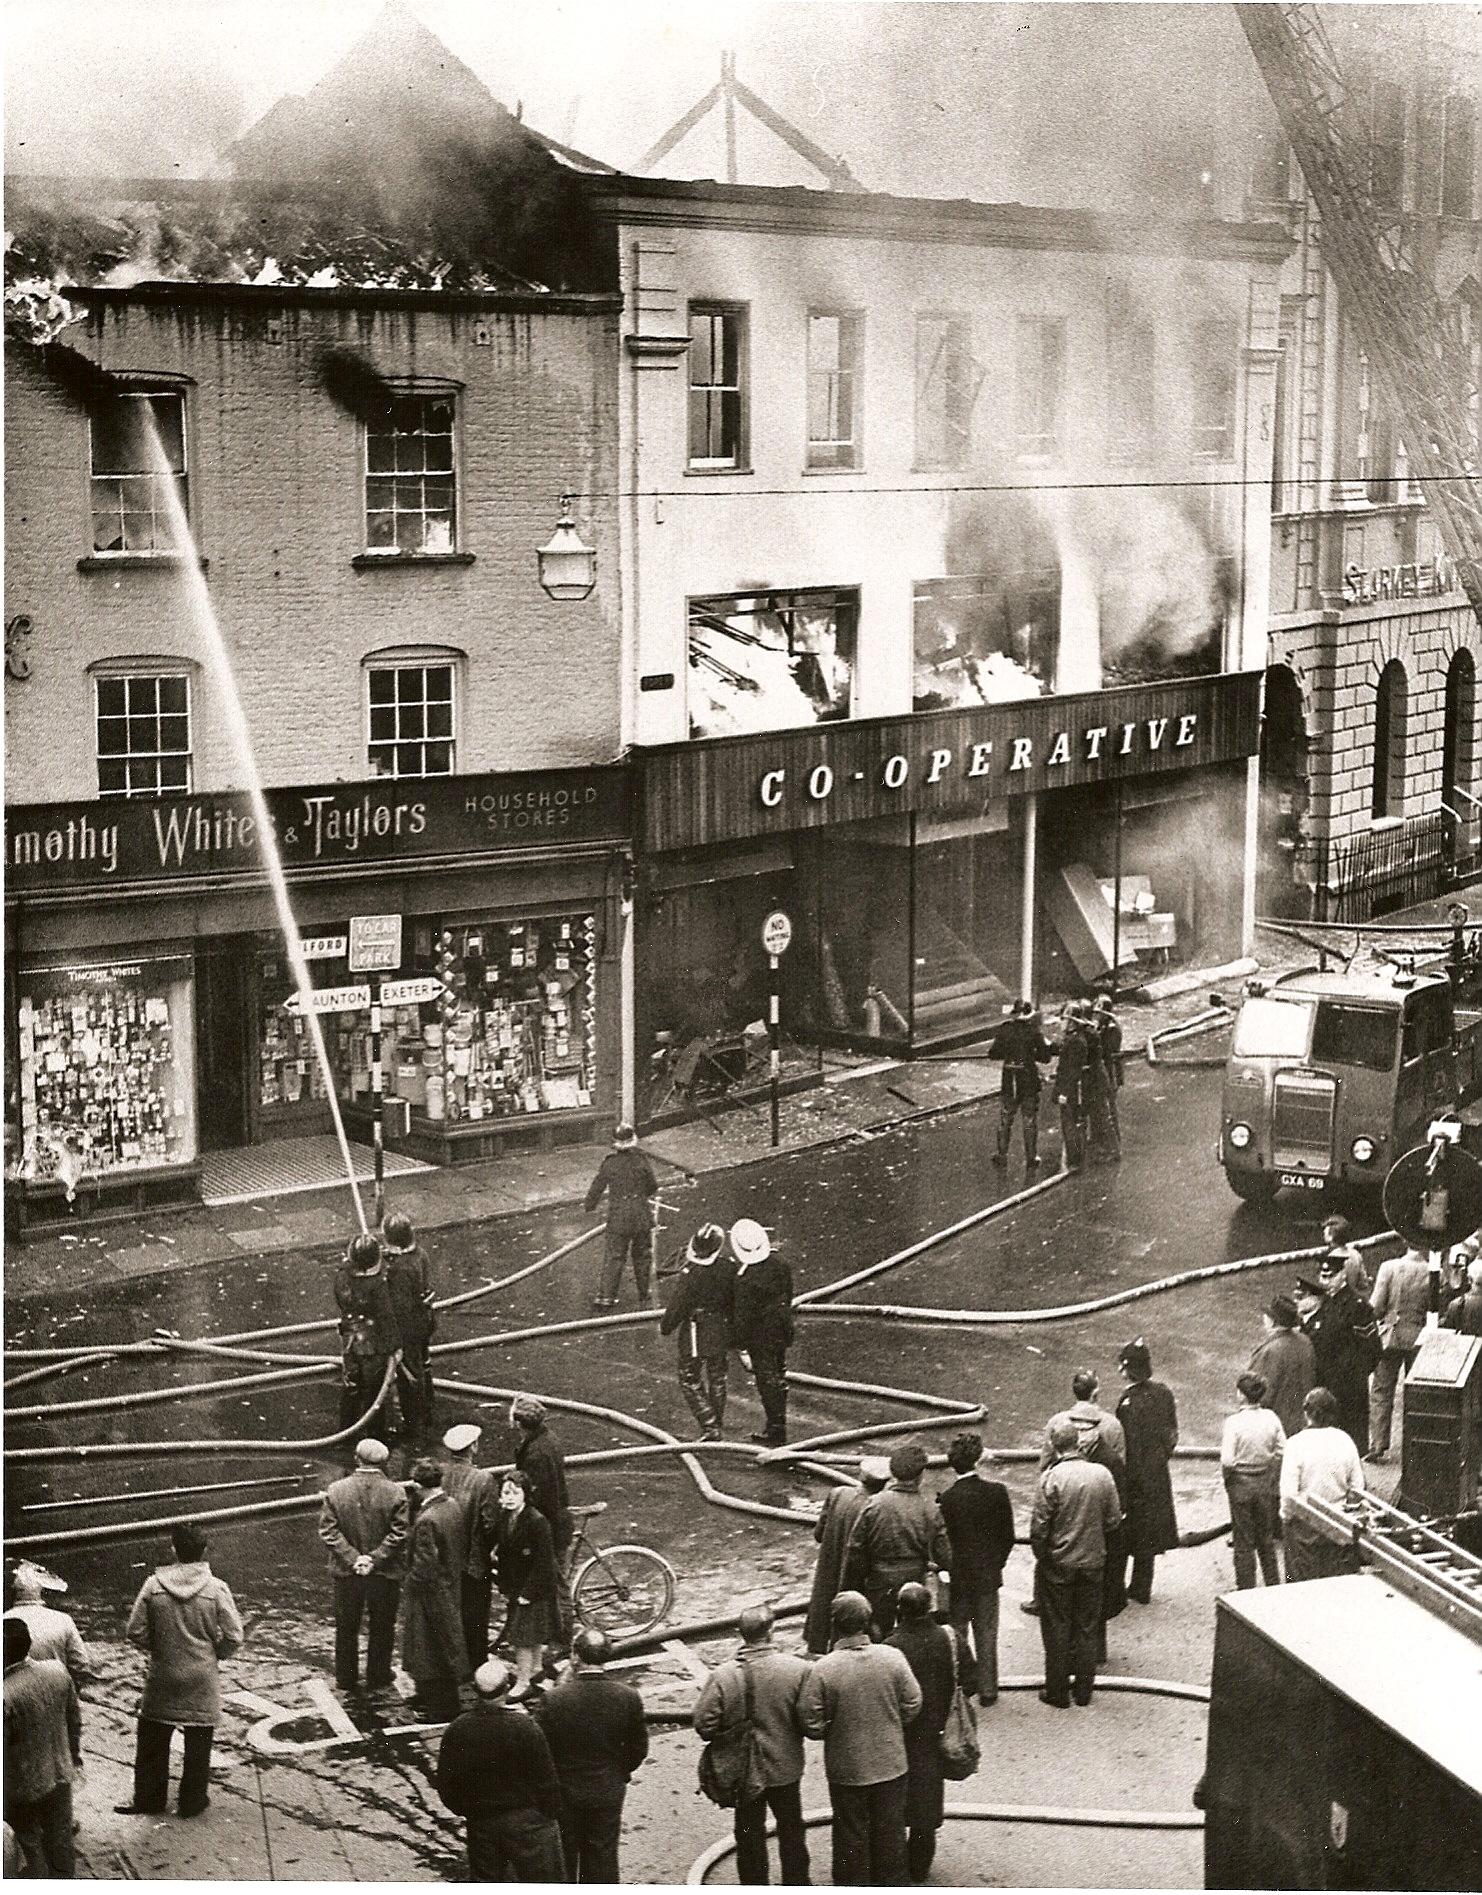 A black and white photo dated from around 1960. It shows two buildings on Tiverton's Fore Street, Whites & Taylors Household Stroes and Co-Operative, on fire. There are firefighters in the foreground tackling the blaze with hoses and lots of bystanders watching the fire.